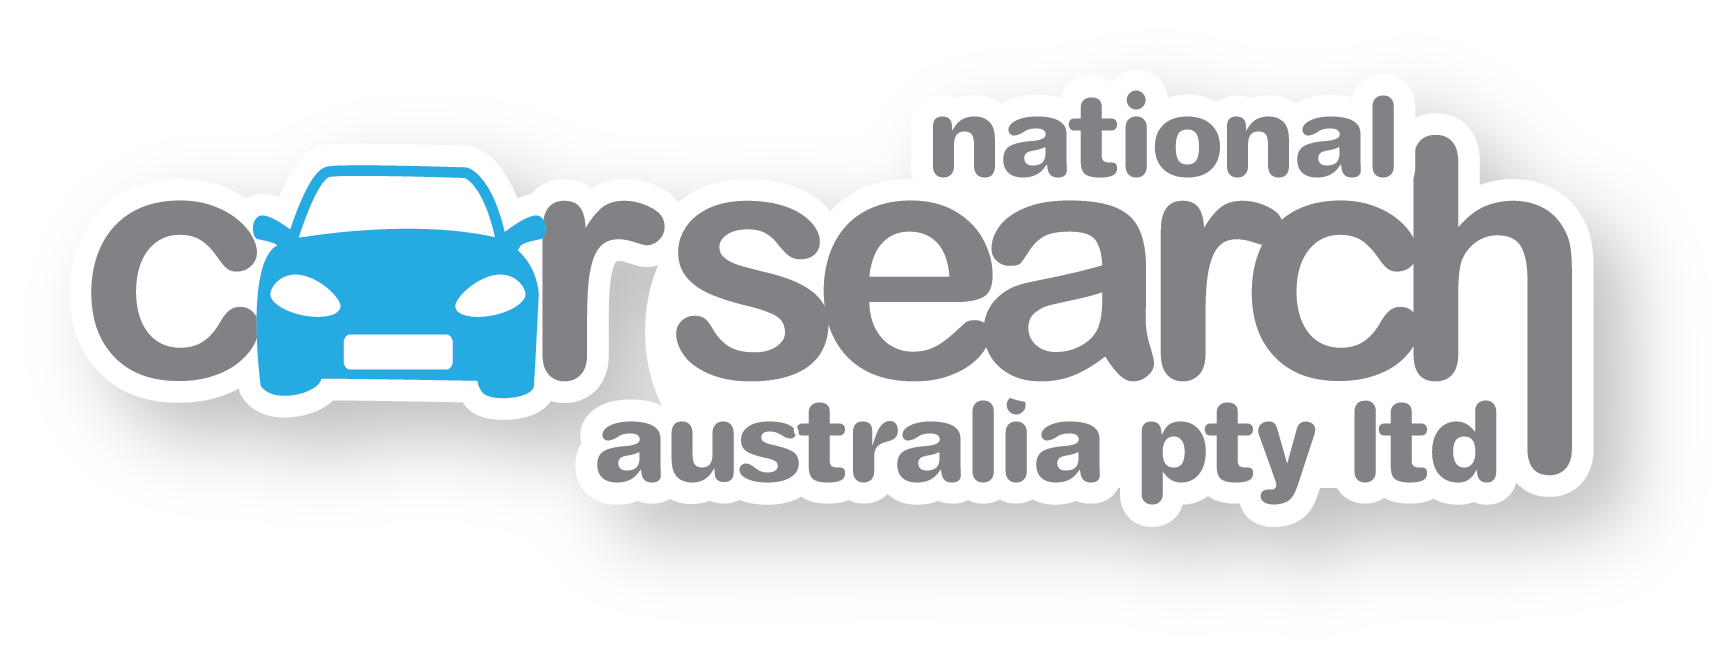 National Car Search